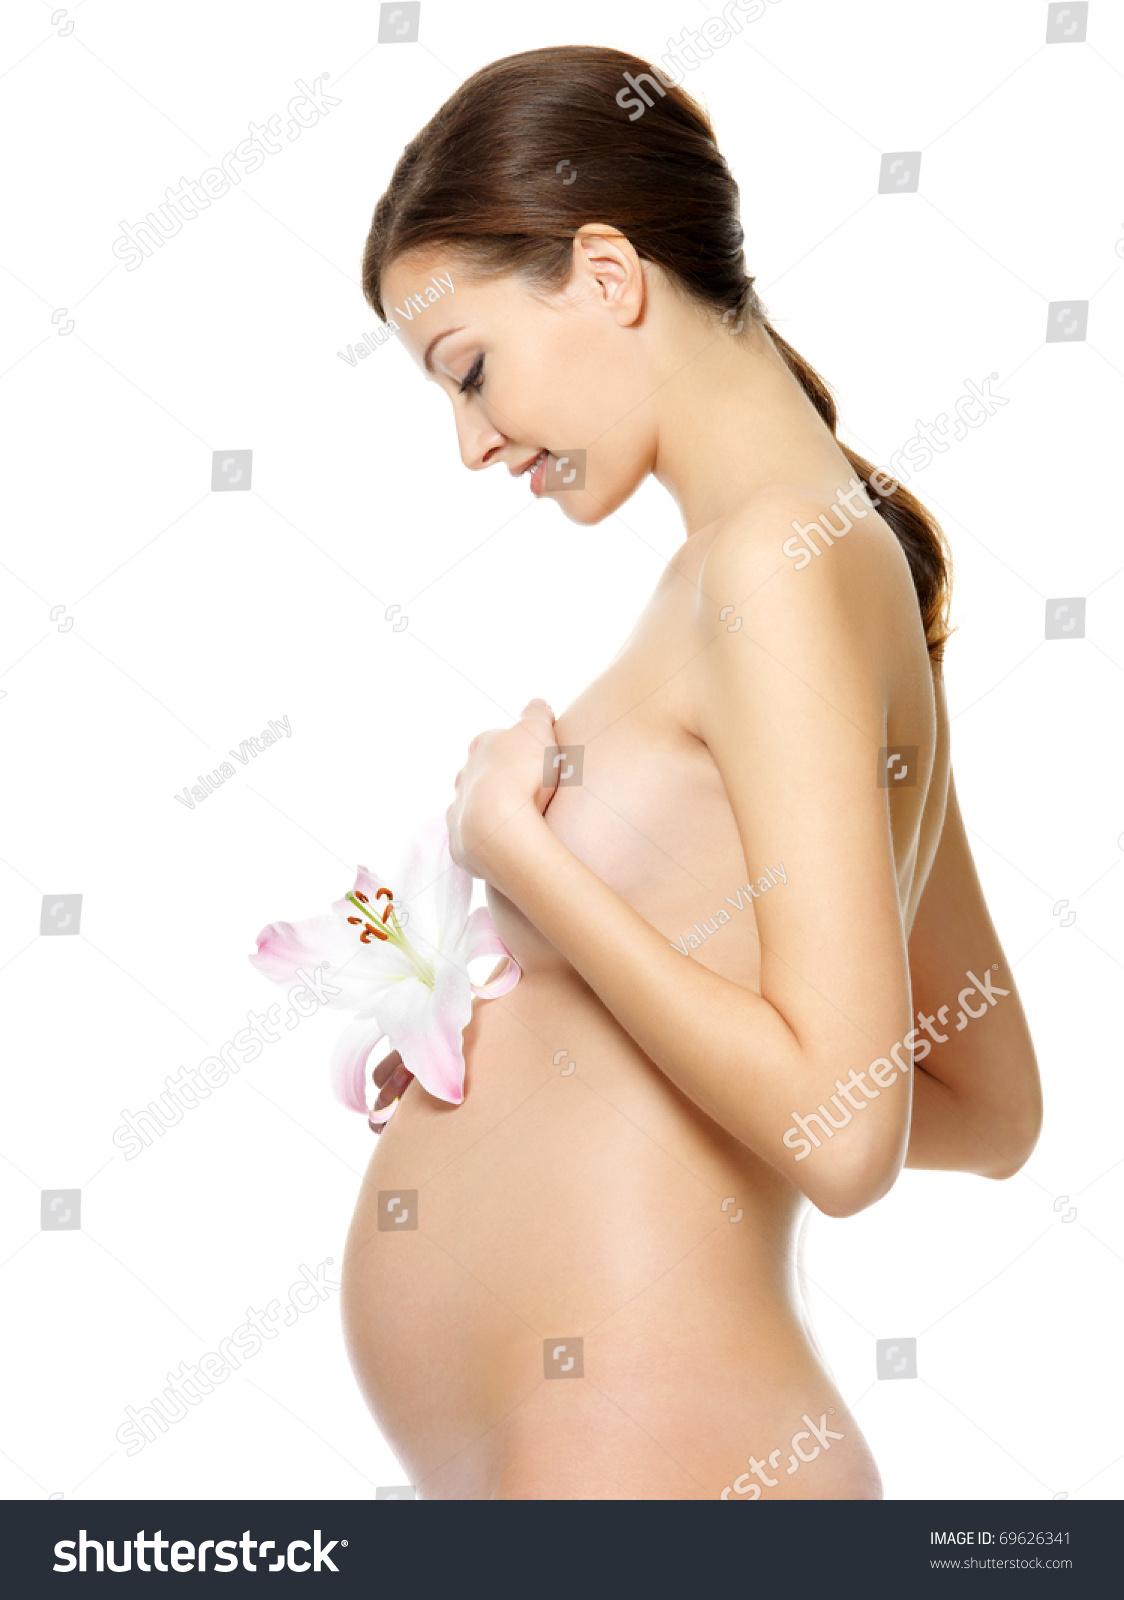 Pregnant Lady Nude